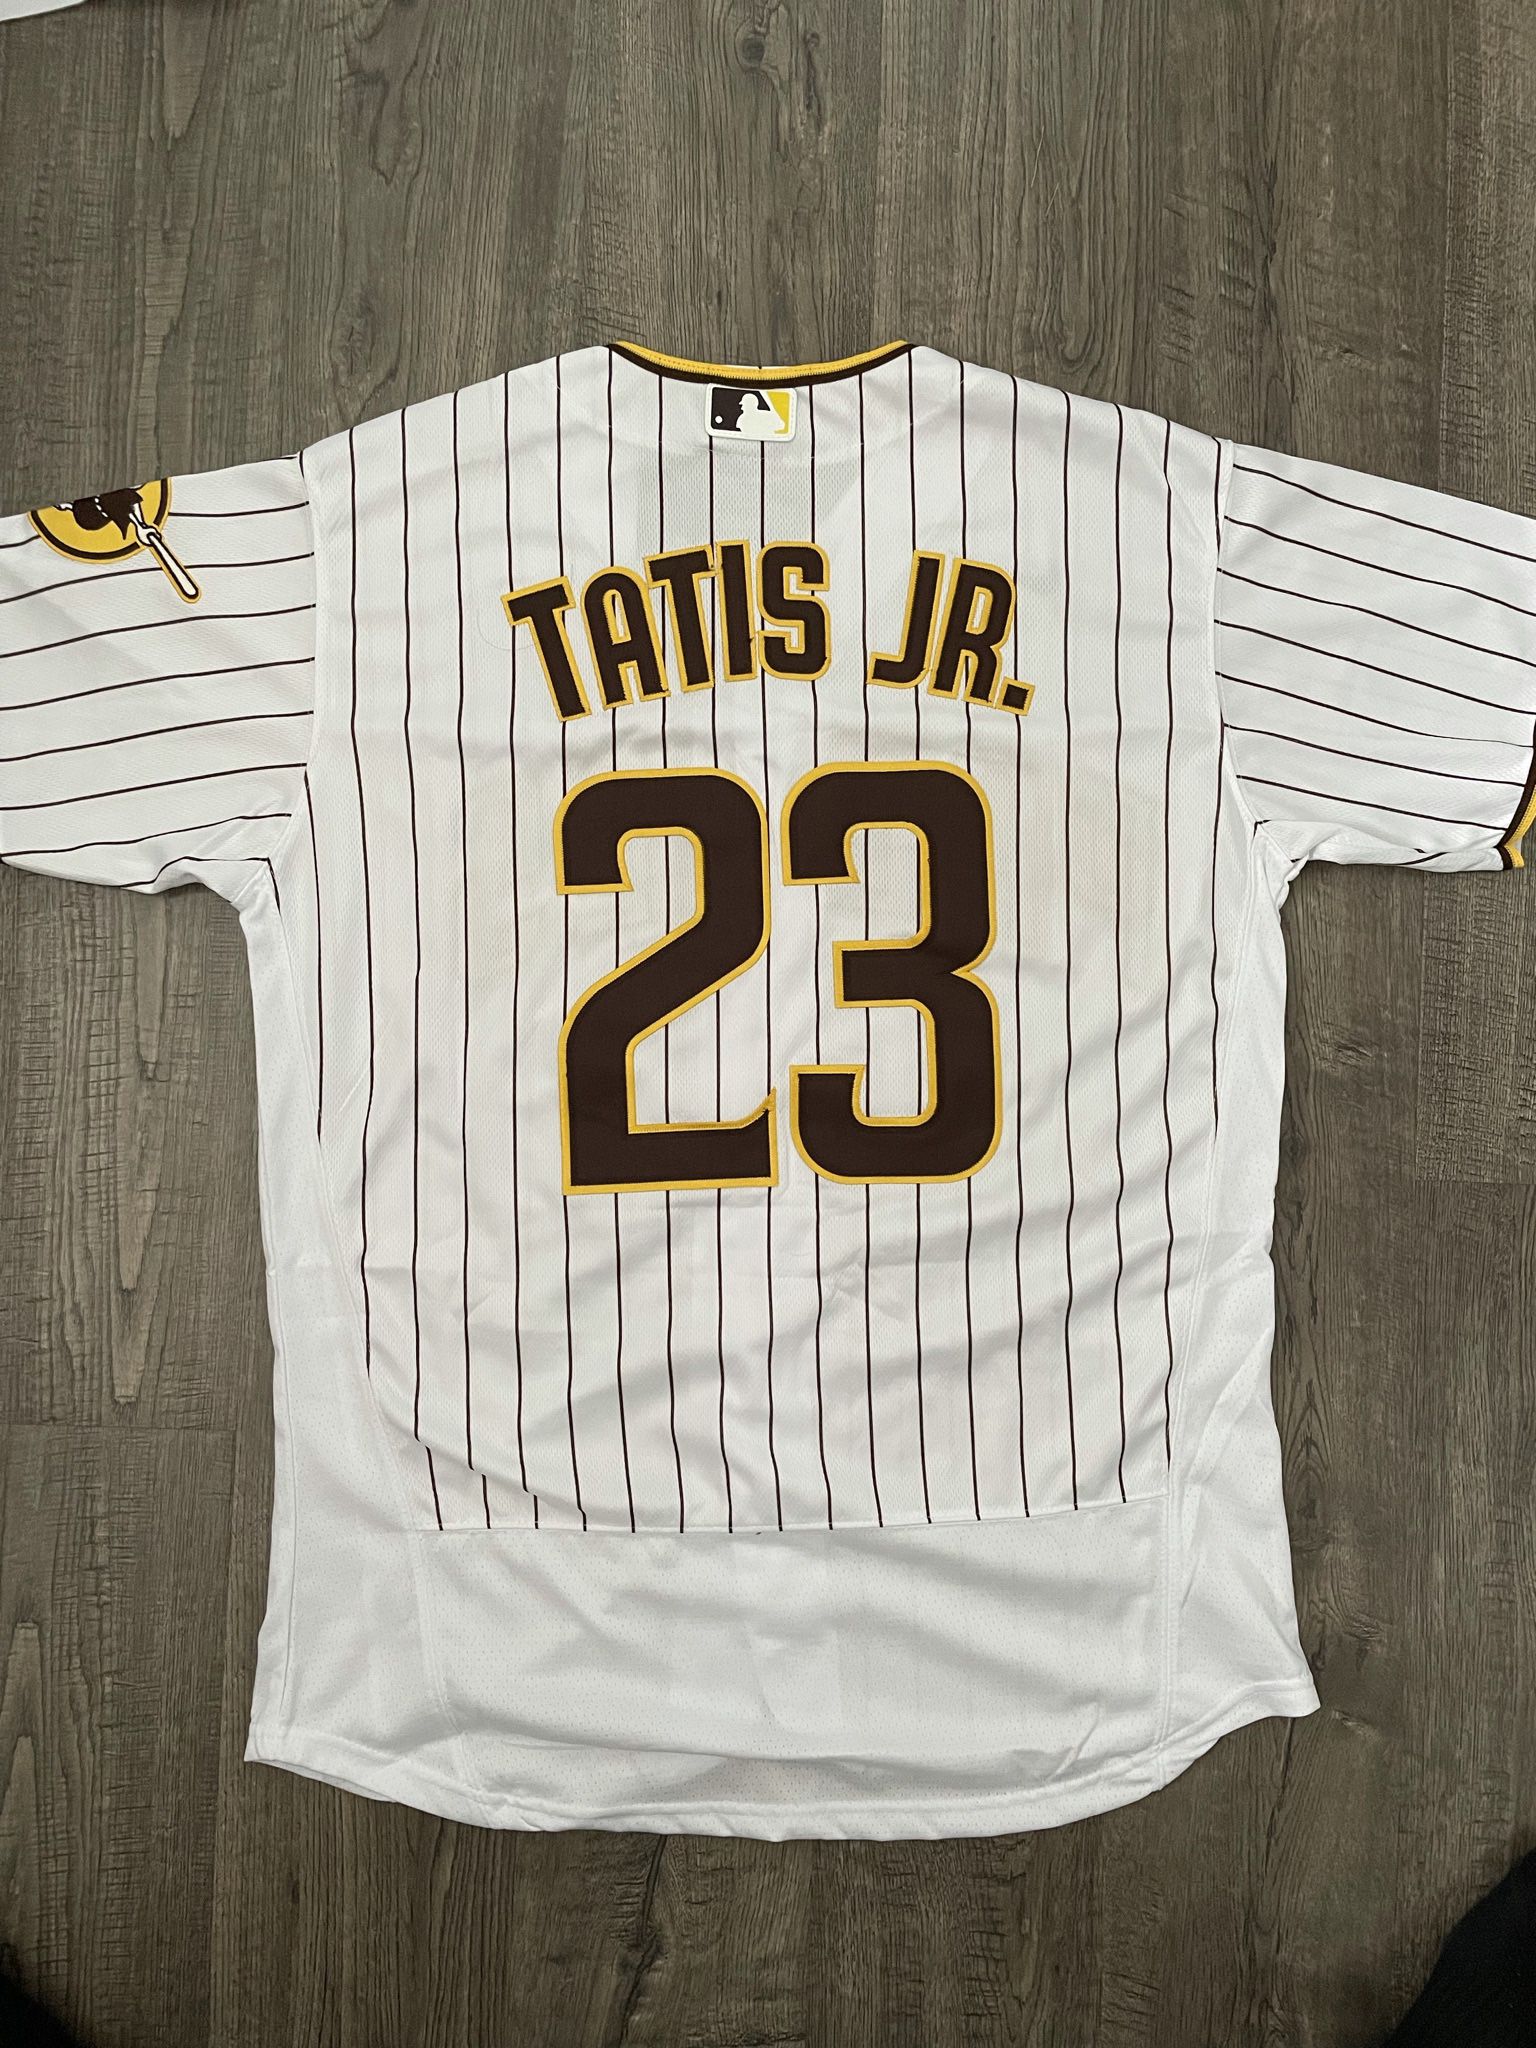 Brand New Padres Jersey Tatis Jr 23 Medium for Sale in Lincoln Acres, CA -  OfferUp